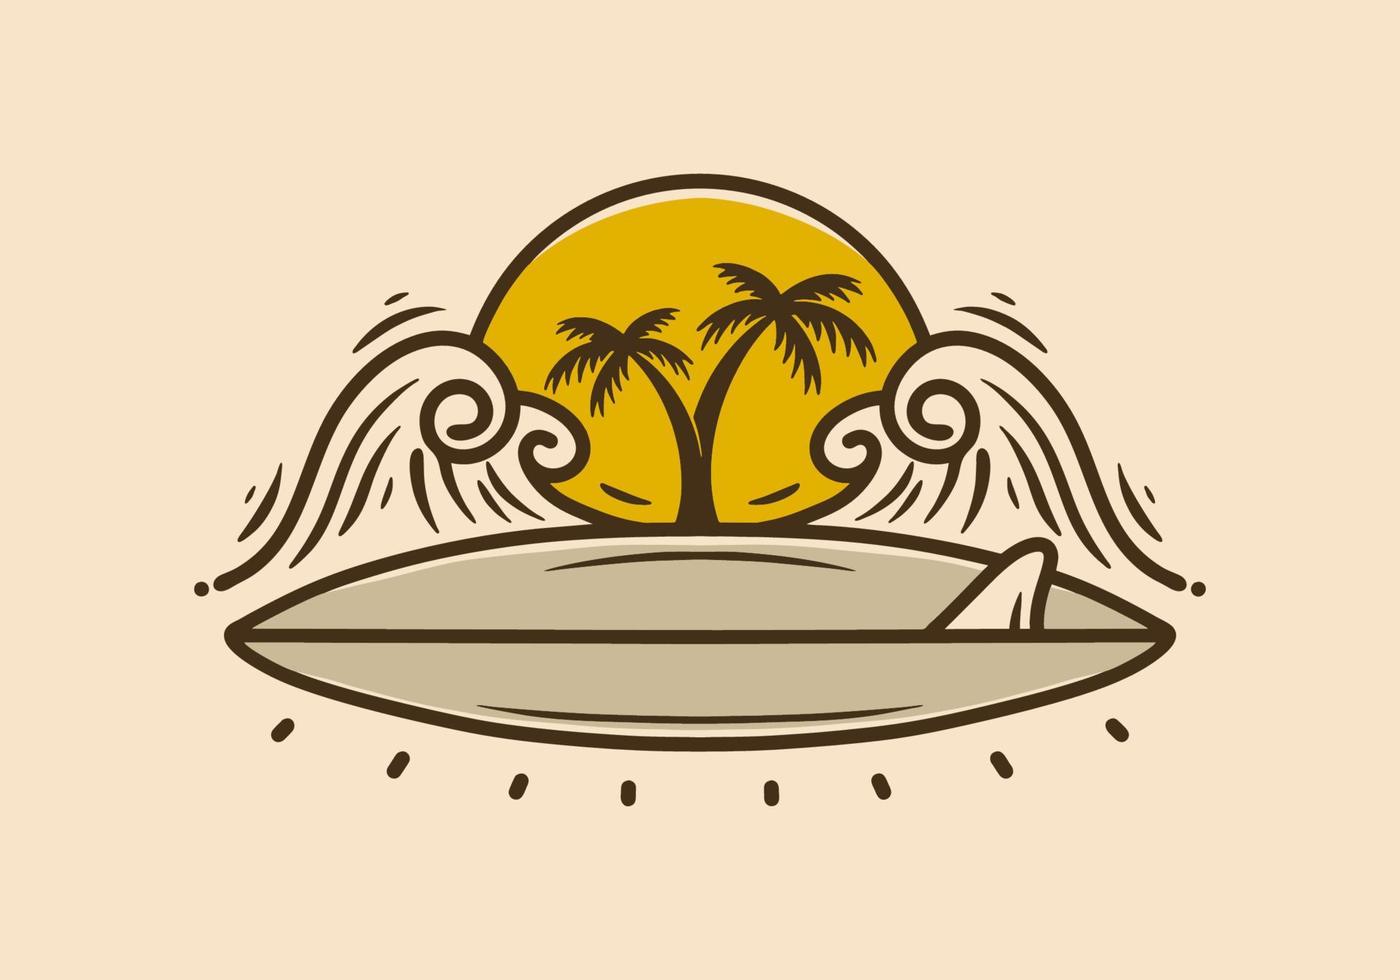 Illustration design of surf board, waves and coconut trees vector